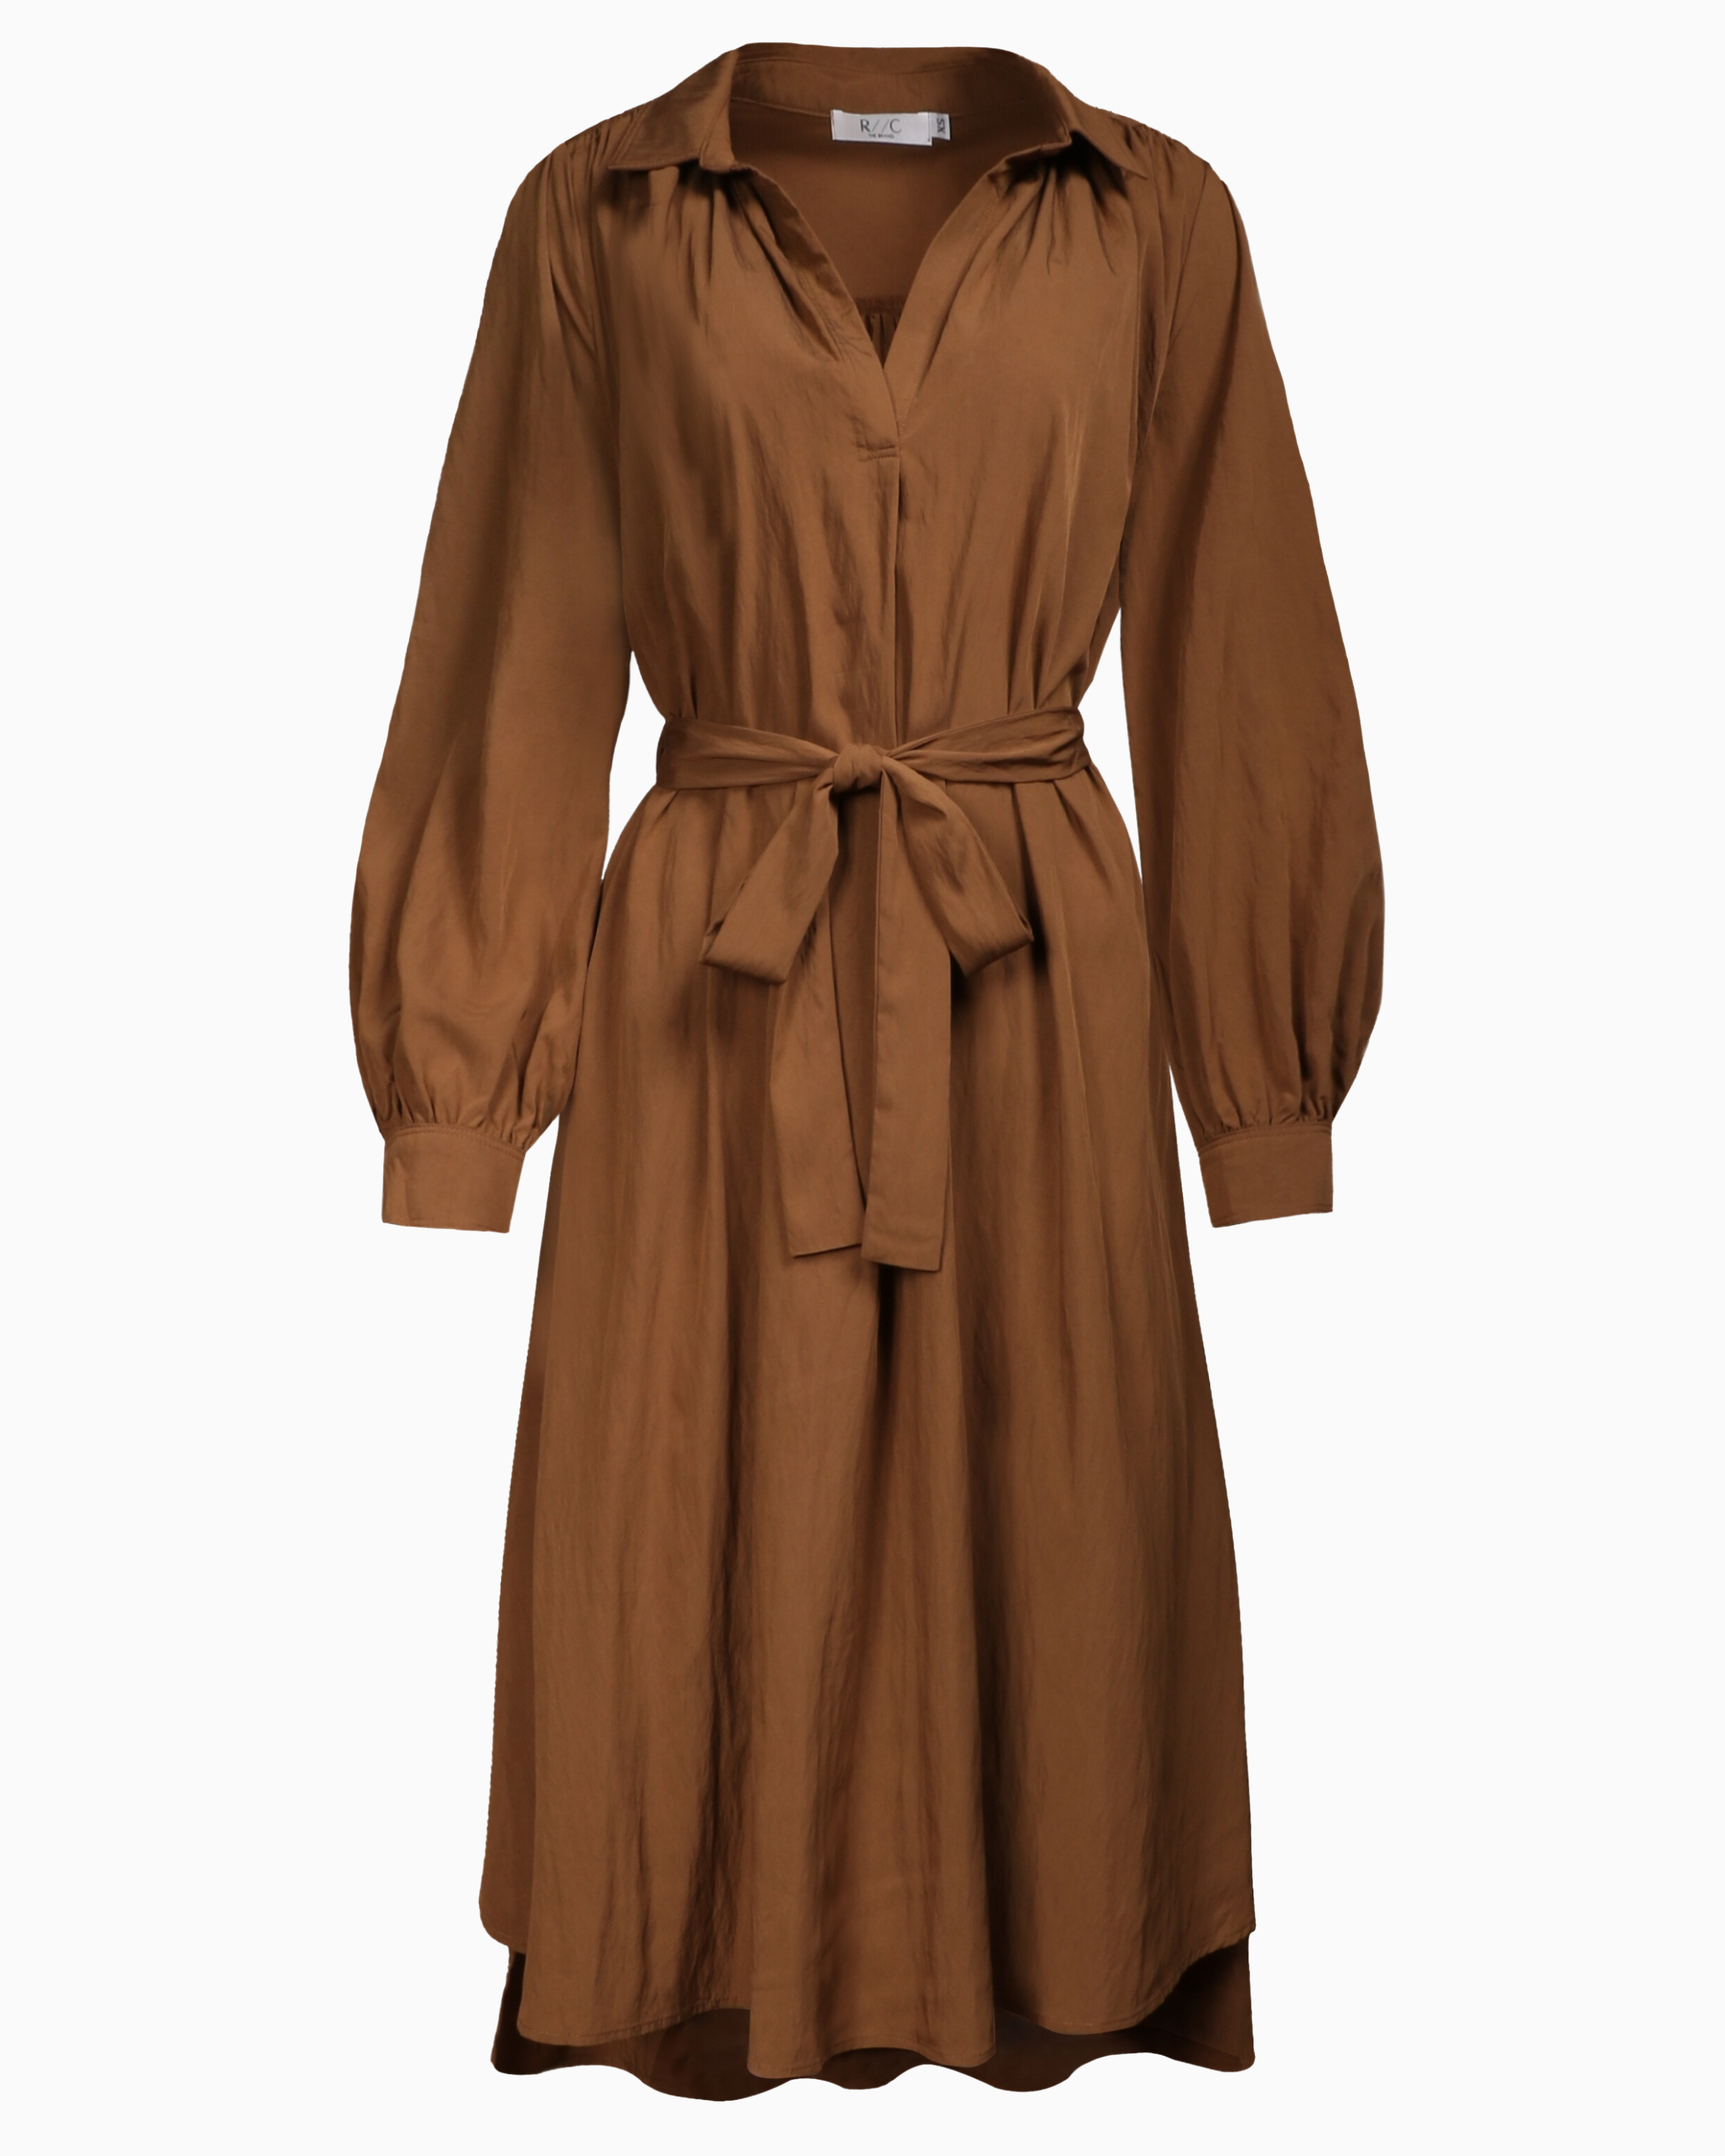 R//C Shirt Dress in Cocoa